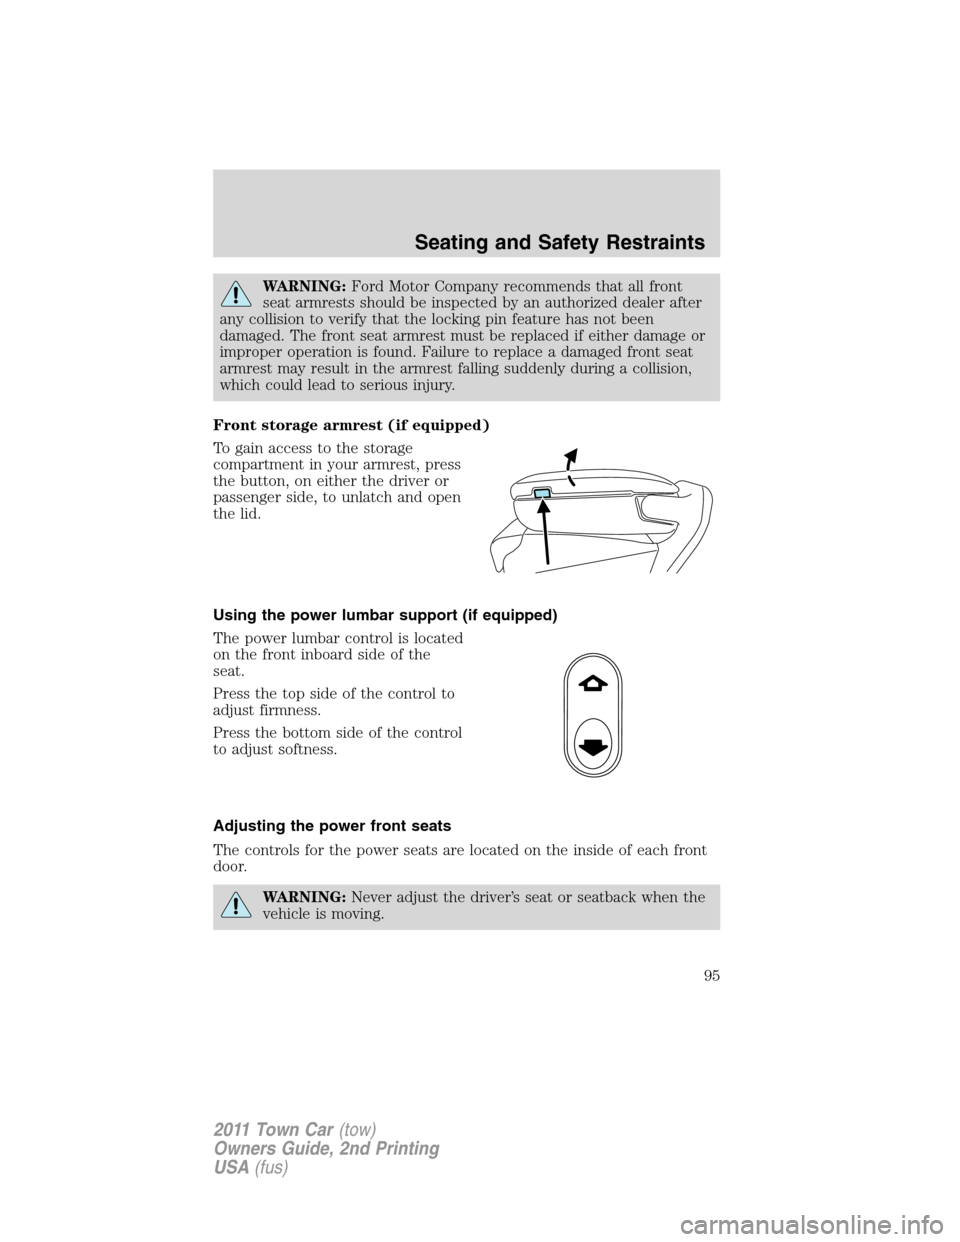 LINCOLN TOWN CAR 2011  Owners Manual WARNING:Ford Motor Company recommends that all front
seat armrests should be inspected by an authorized dealer after
any collision to verify that the locking pin feature has not been
damaged. The fron